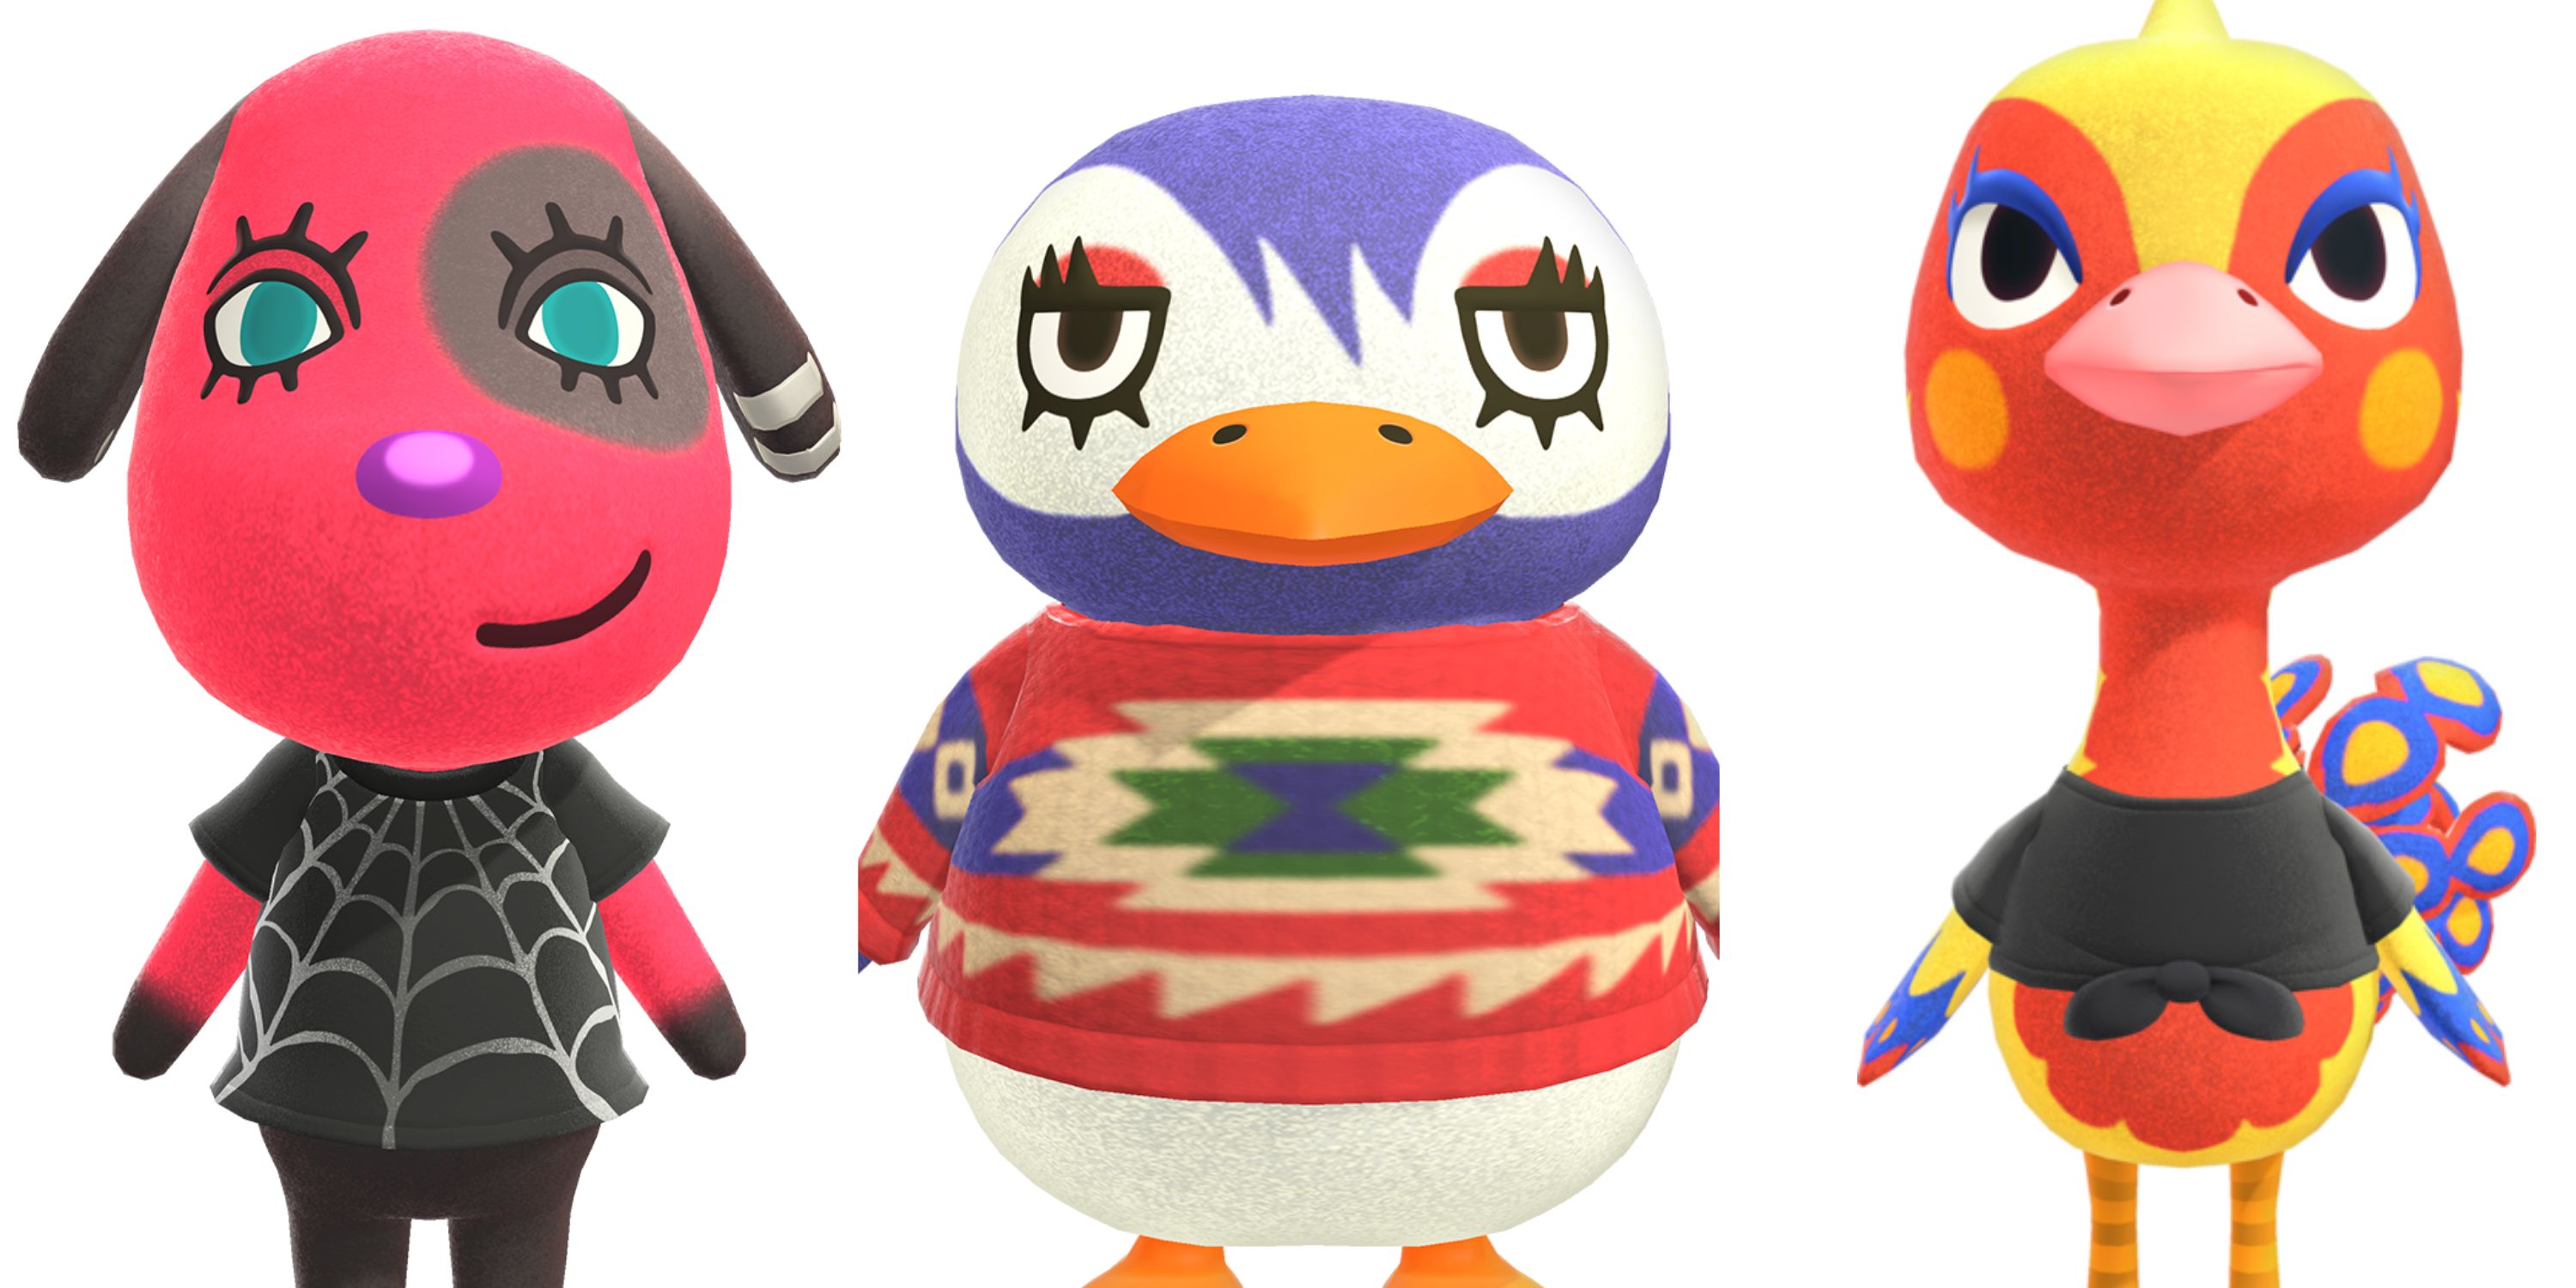 Villagers with the Big Sister personality trait; Cherry, Flo and Phoebe